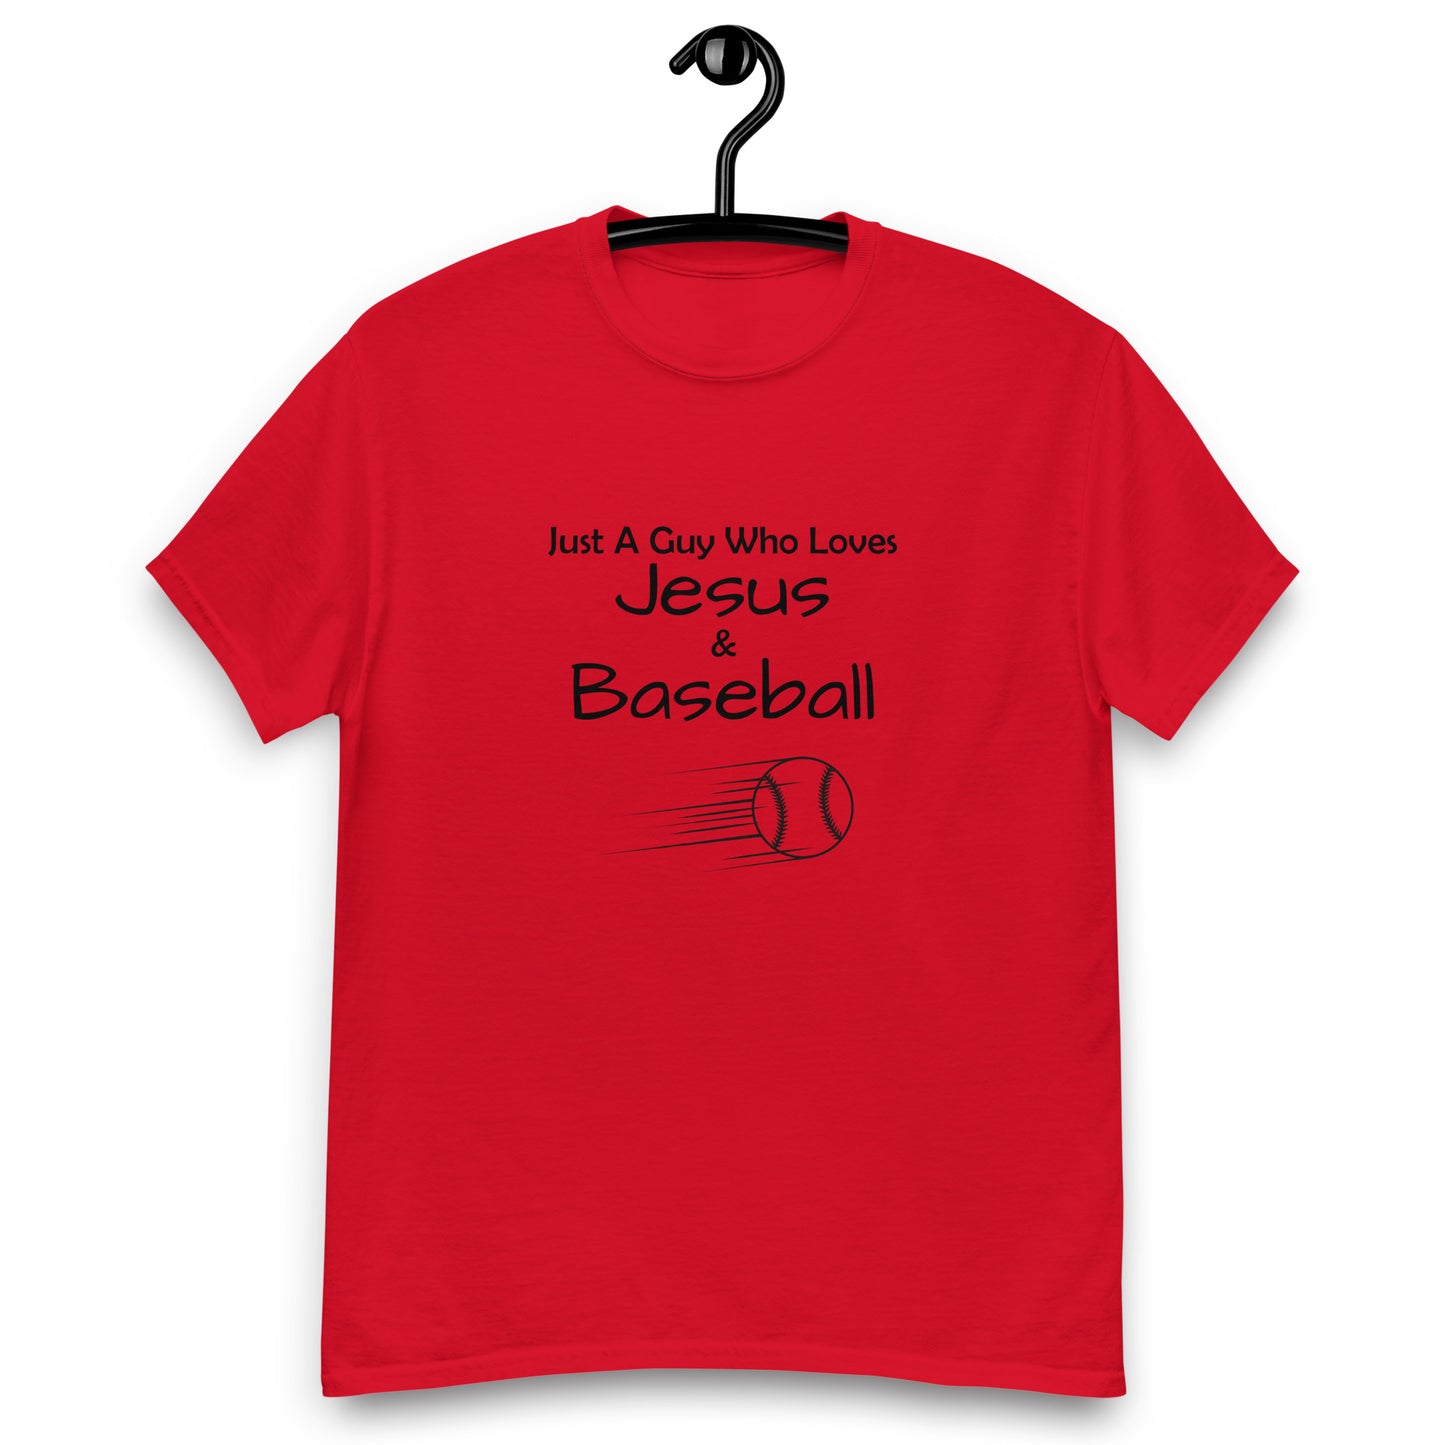 "Just A Guy Who Loves Jesus & Baseball" T-Shirt - Weave Got Gifts - Unique Gifts You Won’t Find Anywhere Else!